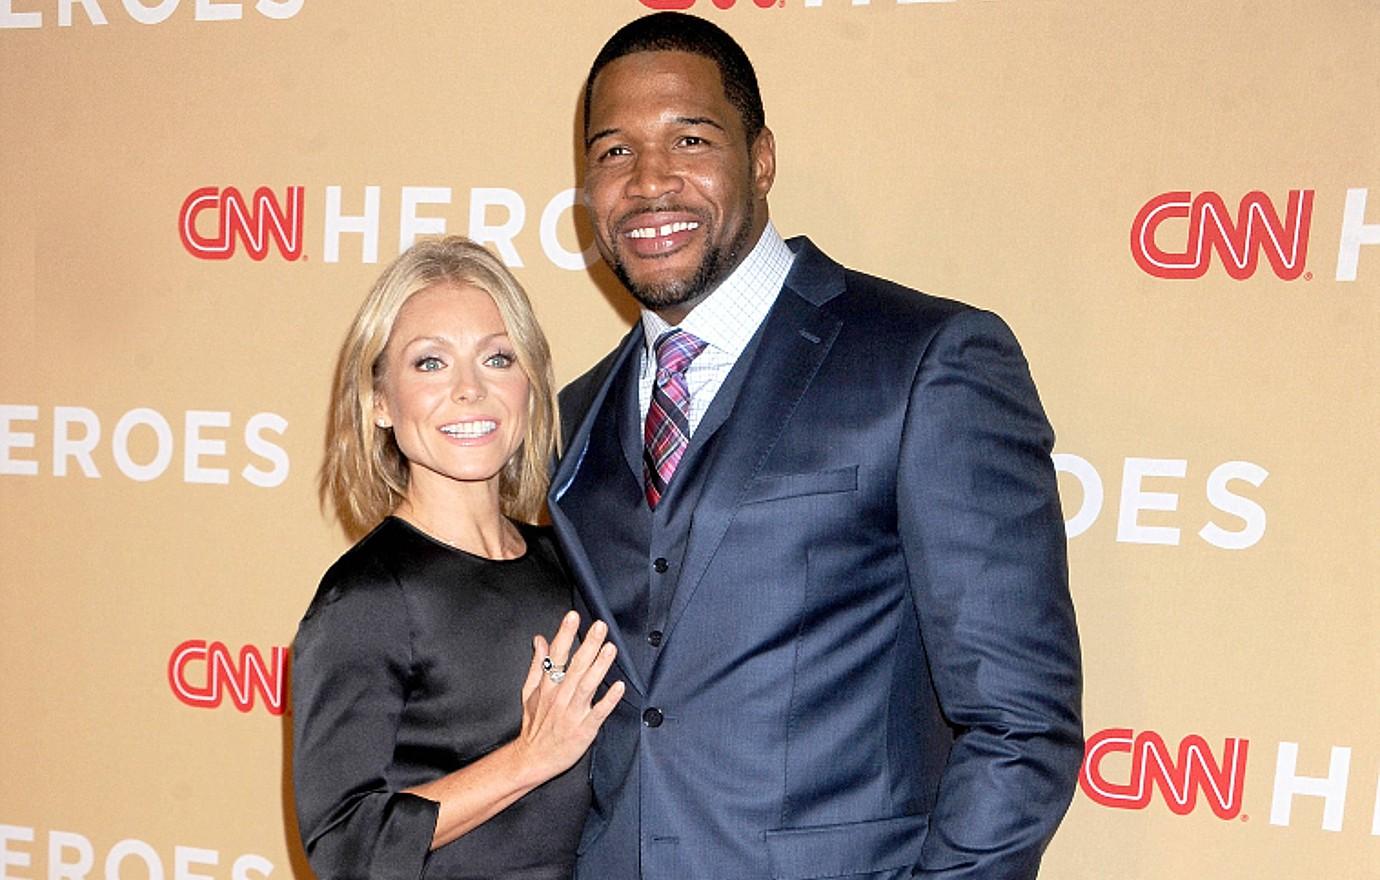 Michael Strahan spied on ex amid child support fight